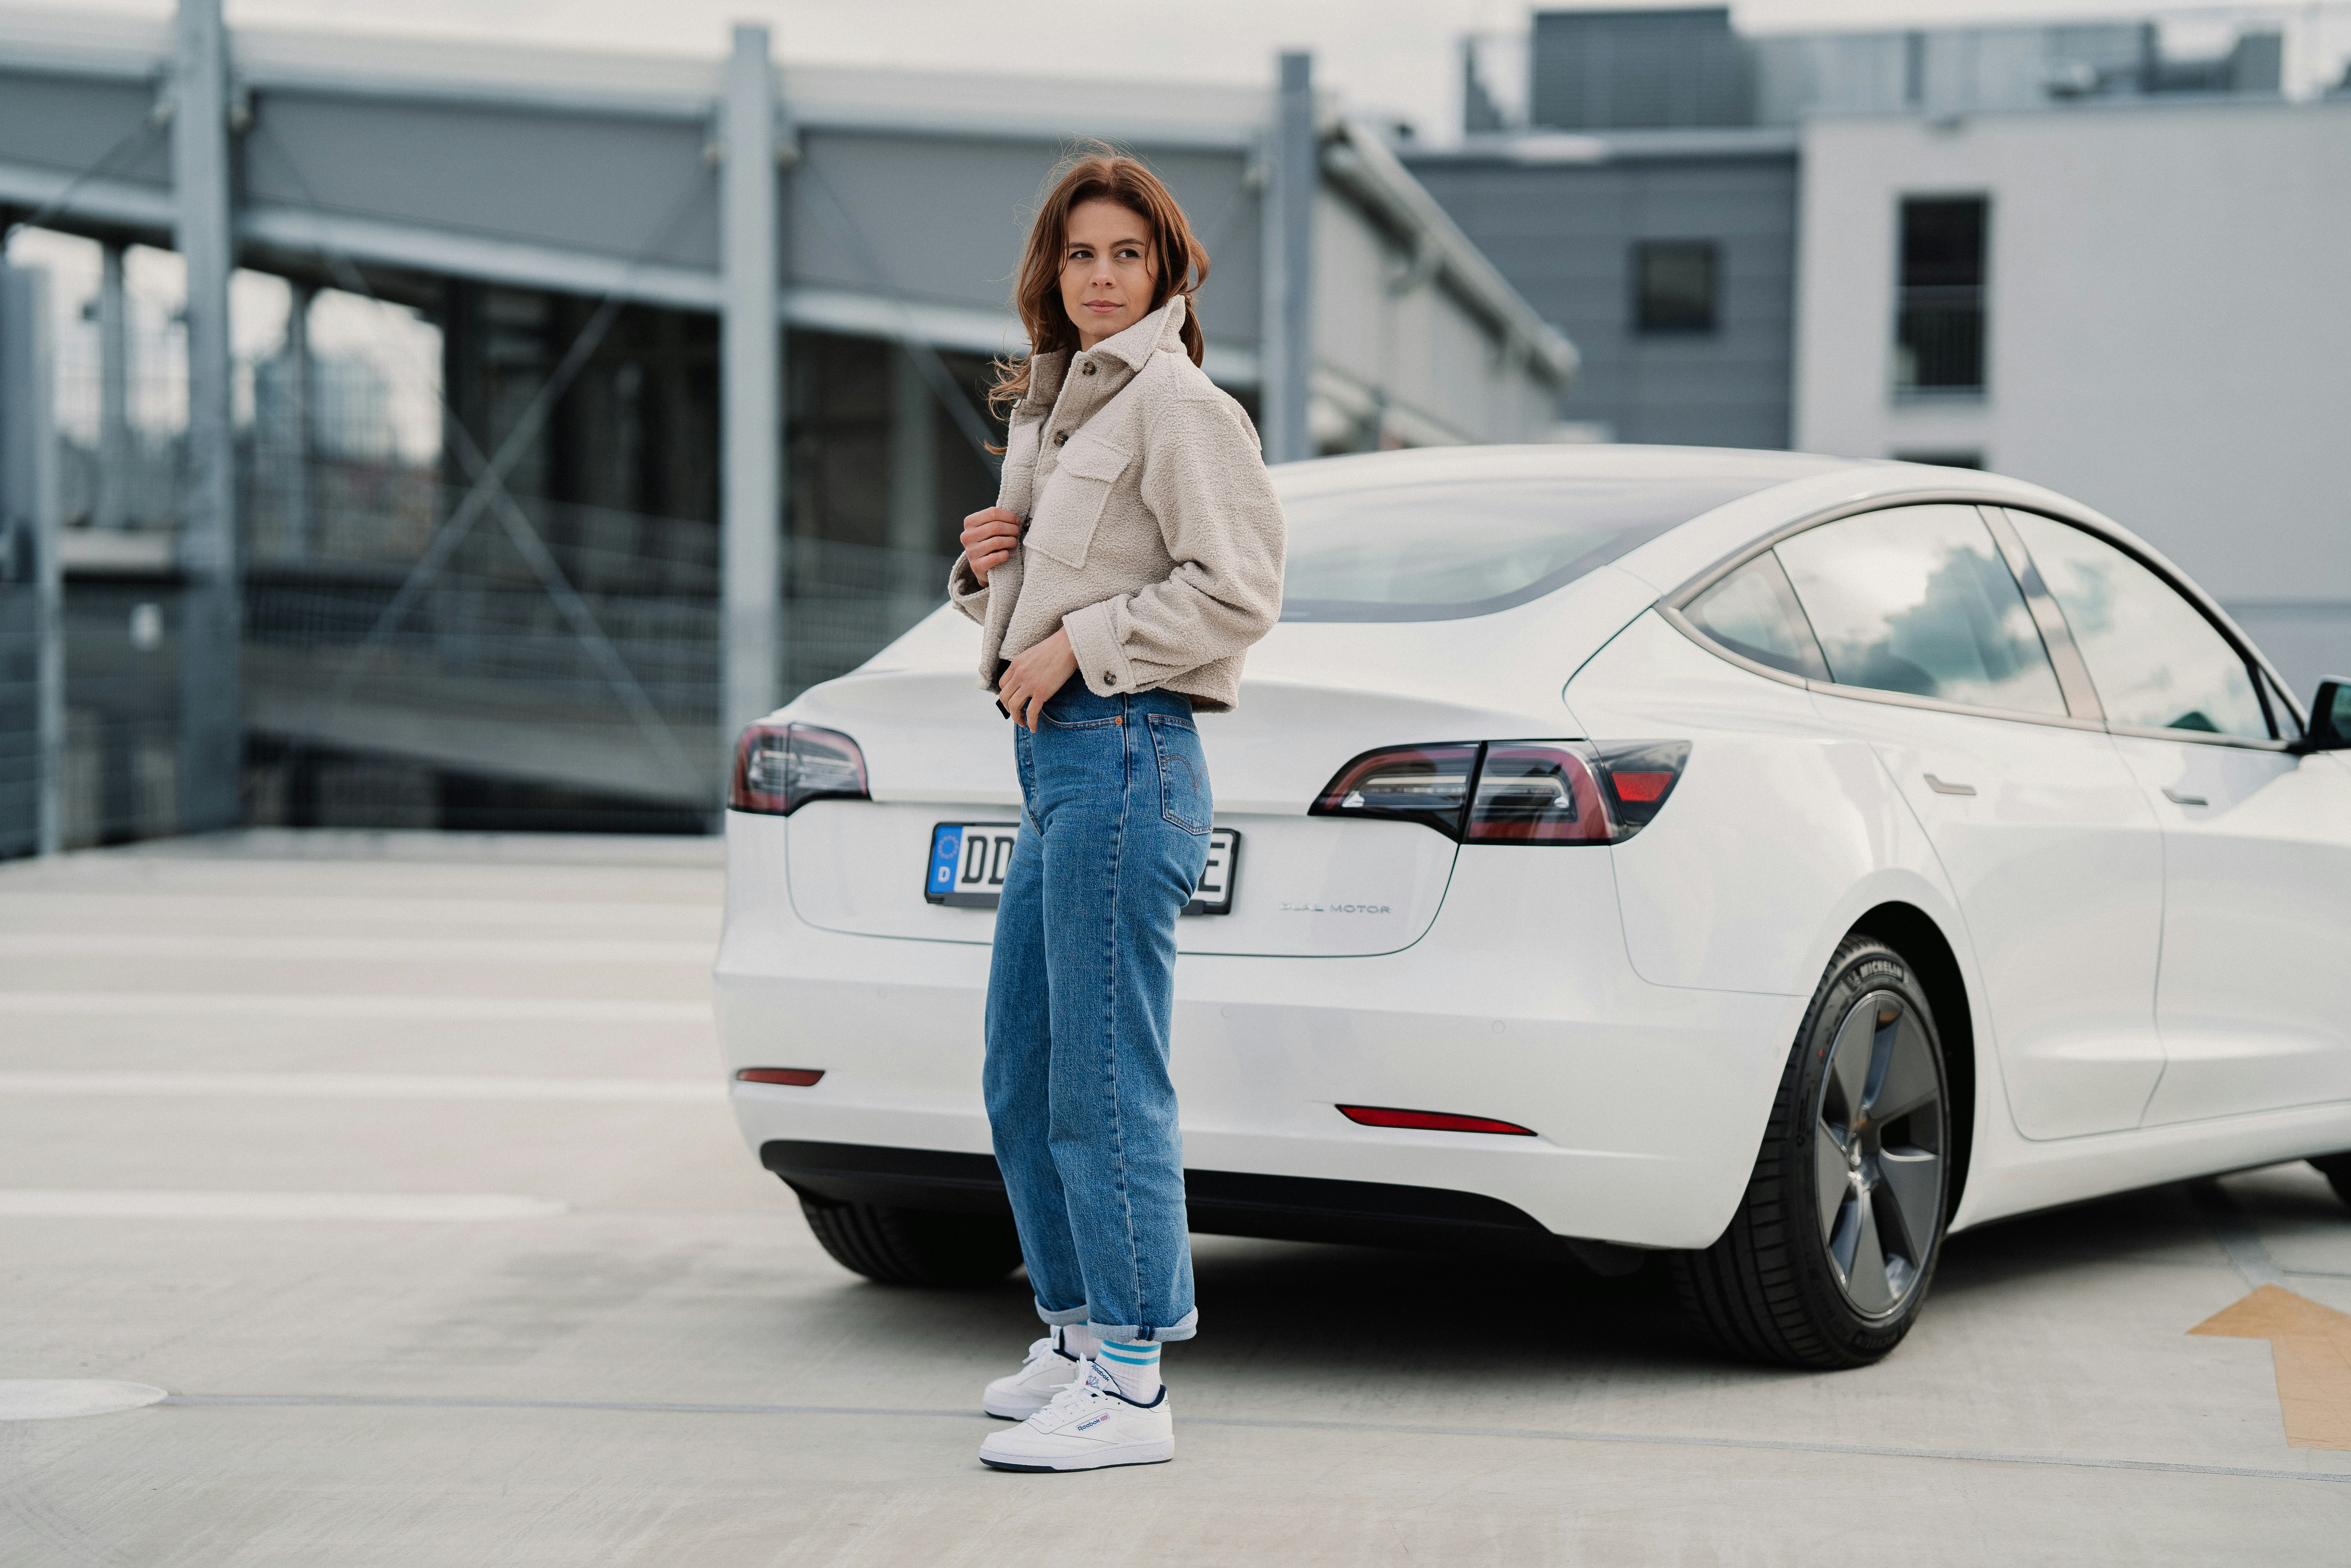 woman in white jacket and blue denim jeans standing beside white car during daytime